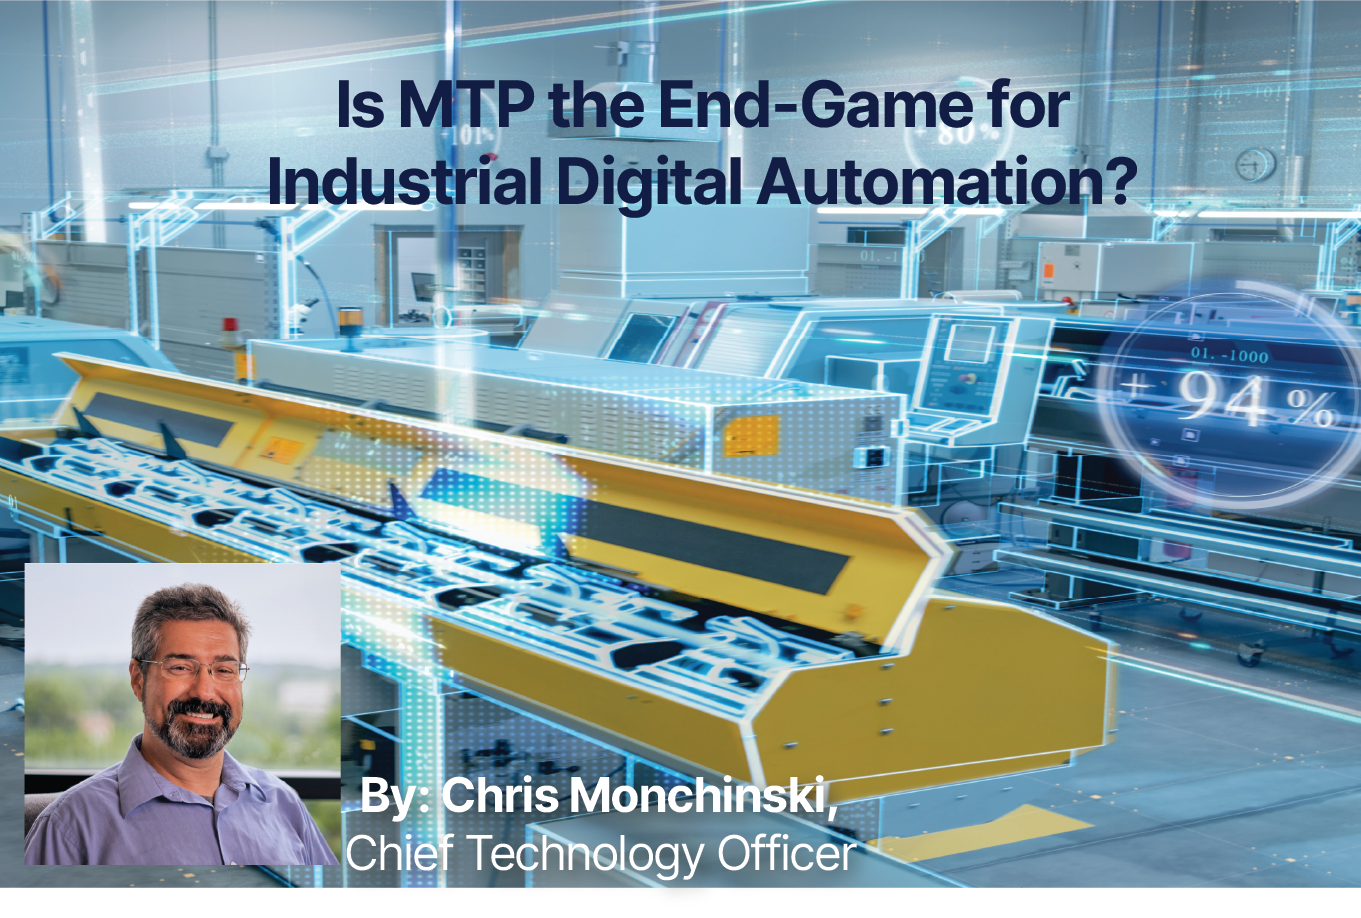 Is MTP the end game for industrial digital automation?